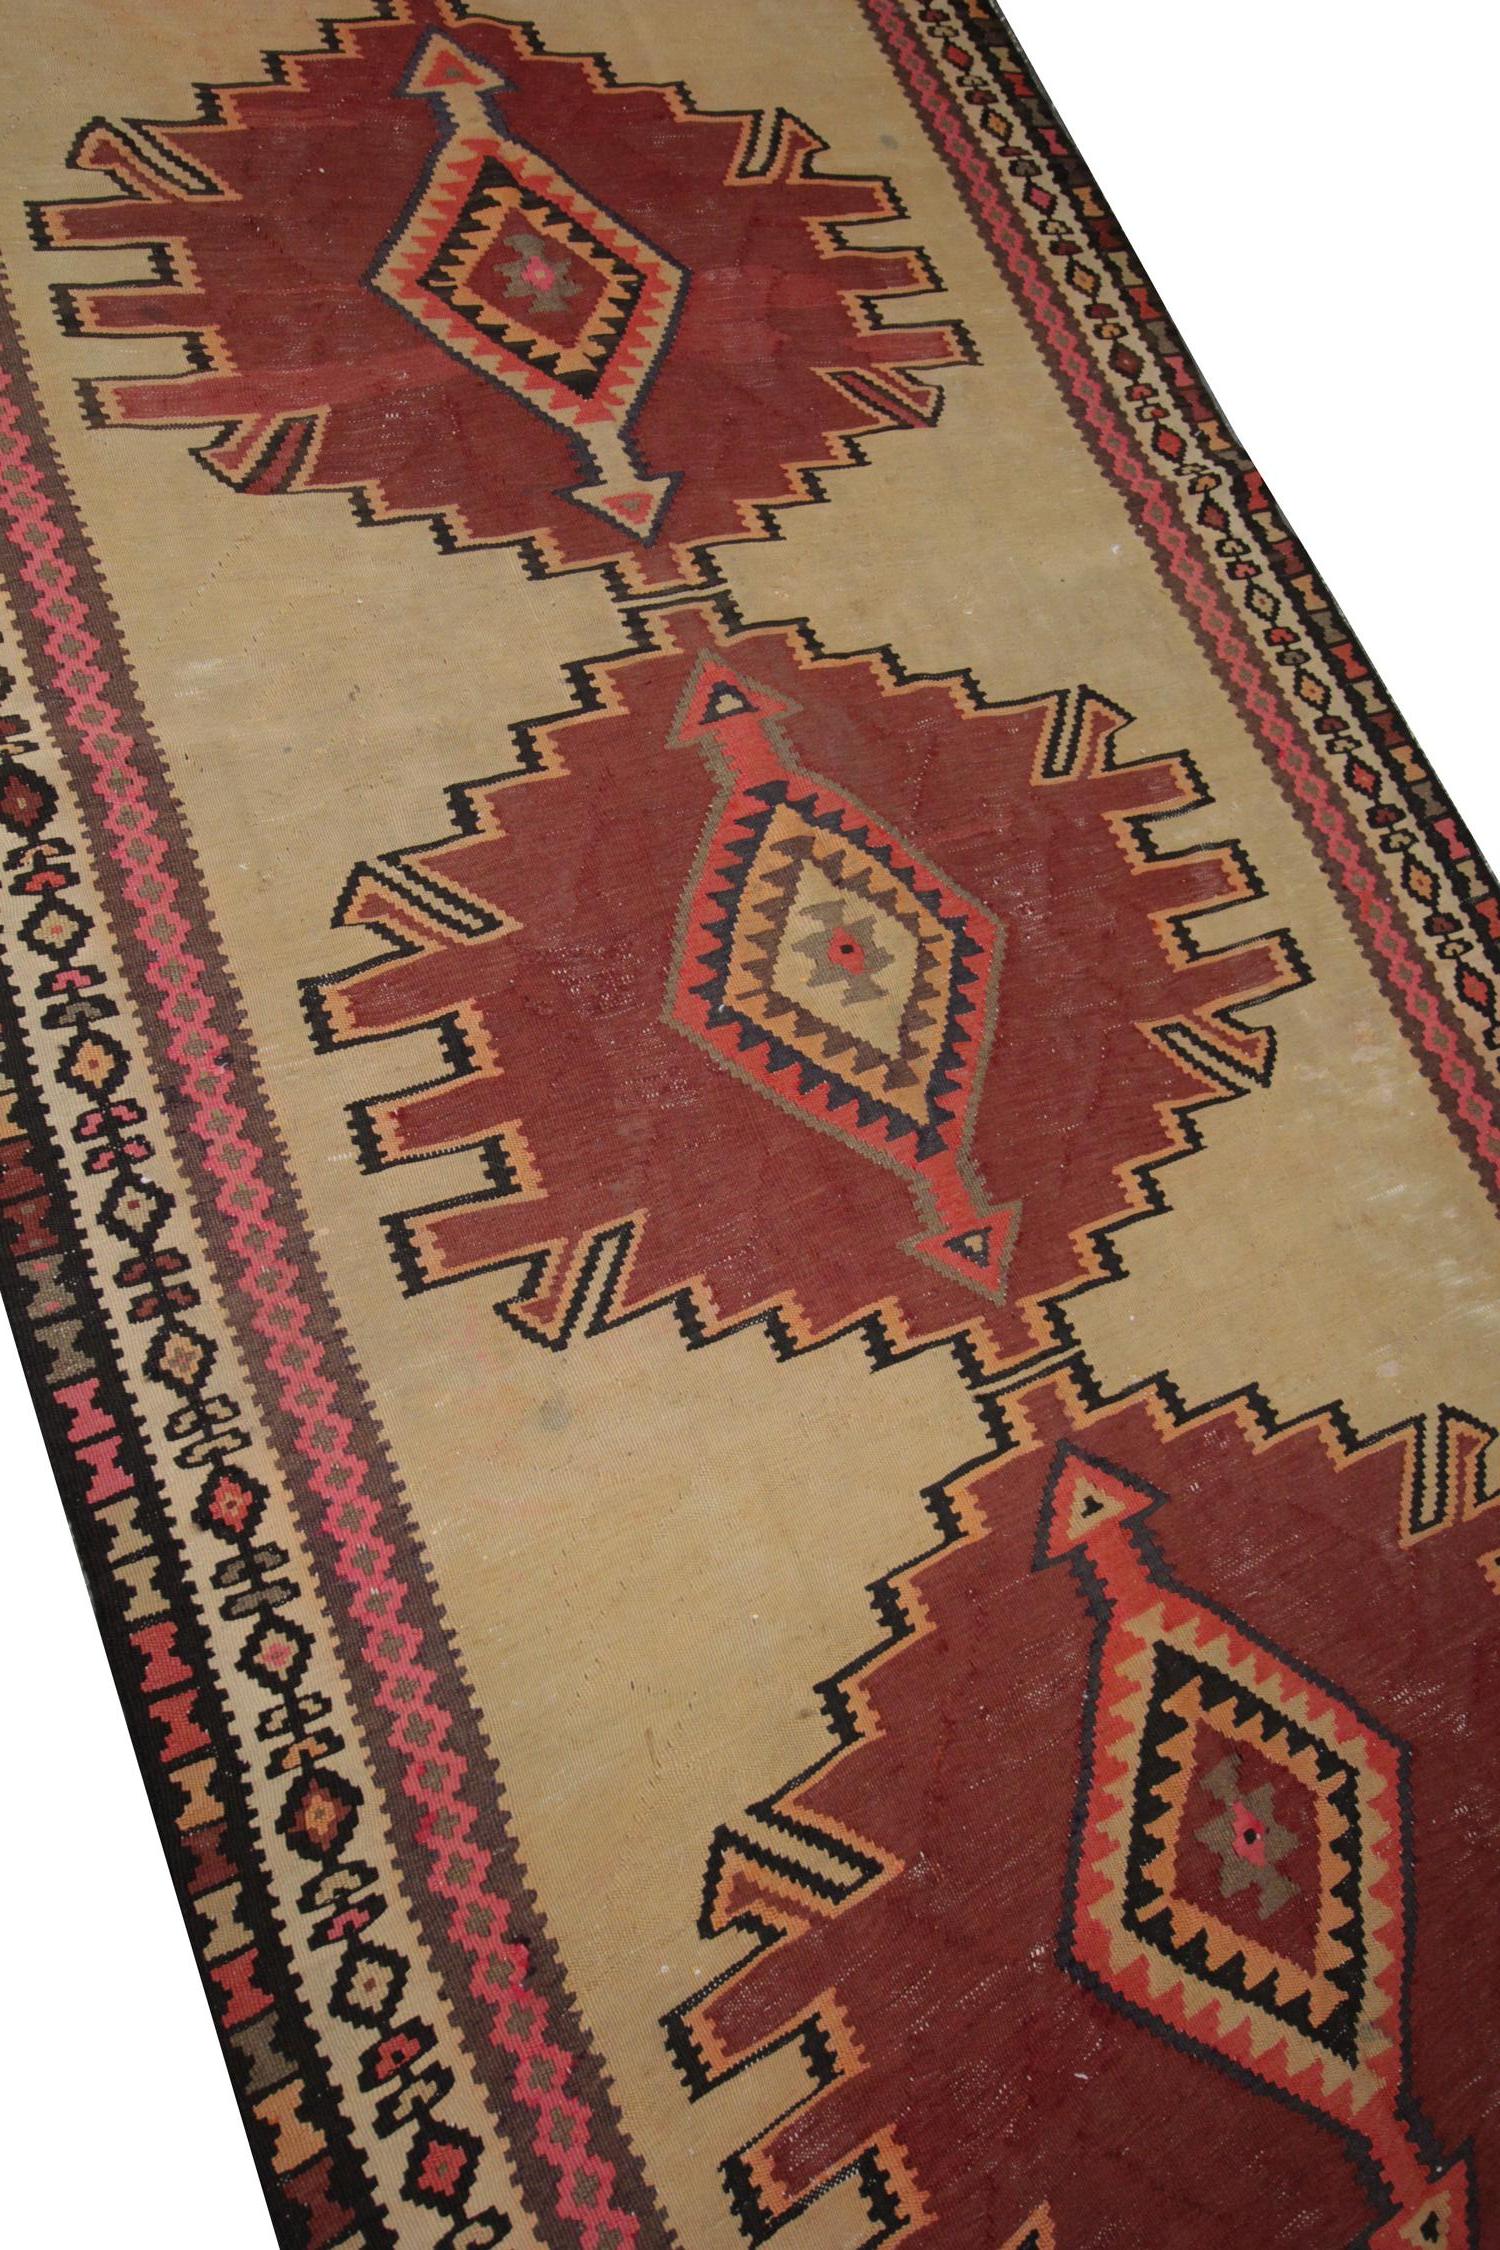 This tribal wool rug is a Kilim rug carpet with patterns and designs that derive from Caucasian tribes. The Kelim flat weave rug is all-natural and completely handmade by using the best organic hand-spun wool and cotton. In addition, only organic